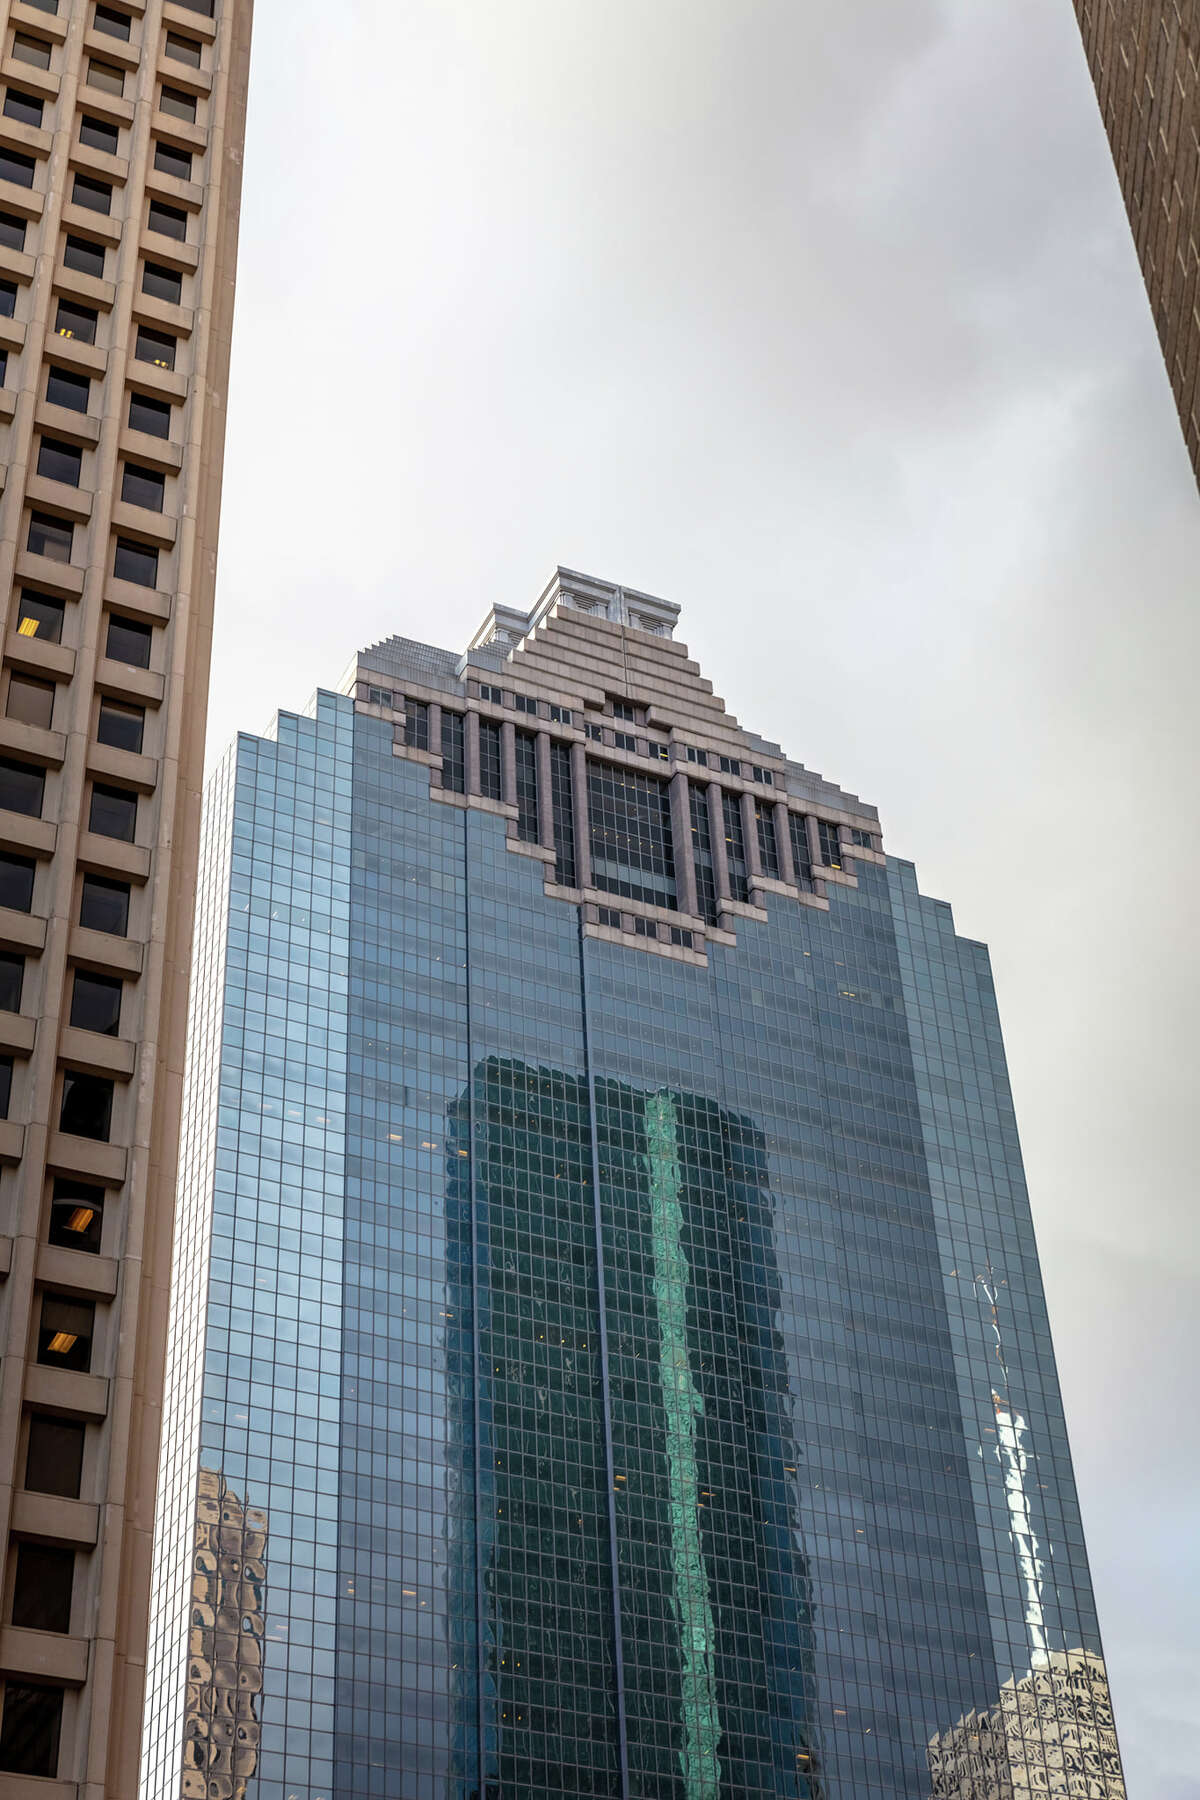 The 52-story Heritage Plaza has been a defining landmark in downtown Houston since it was built in 1987.